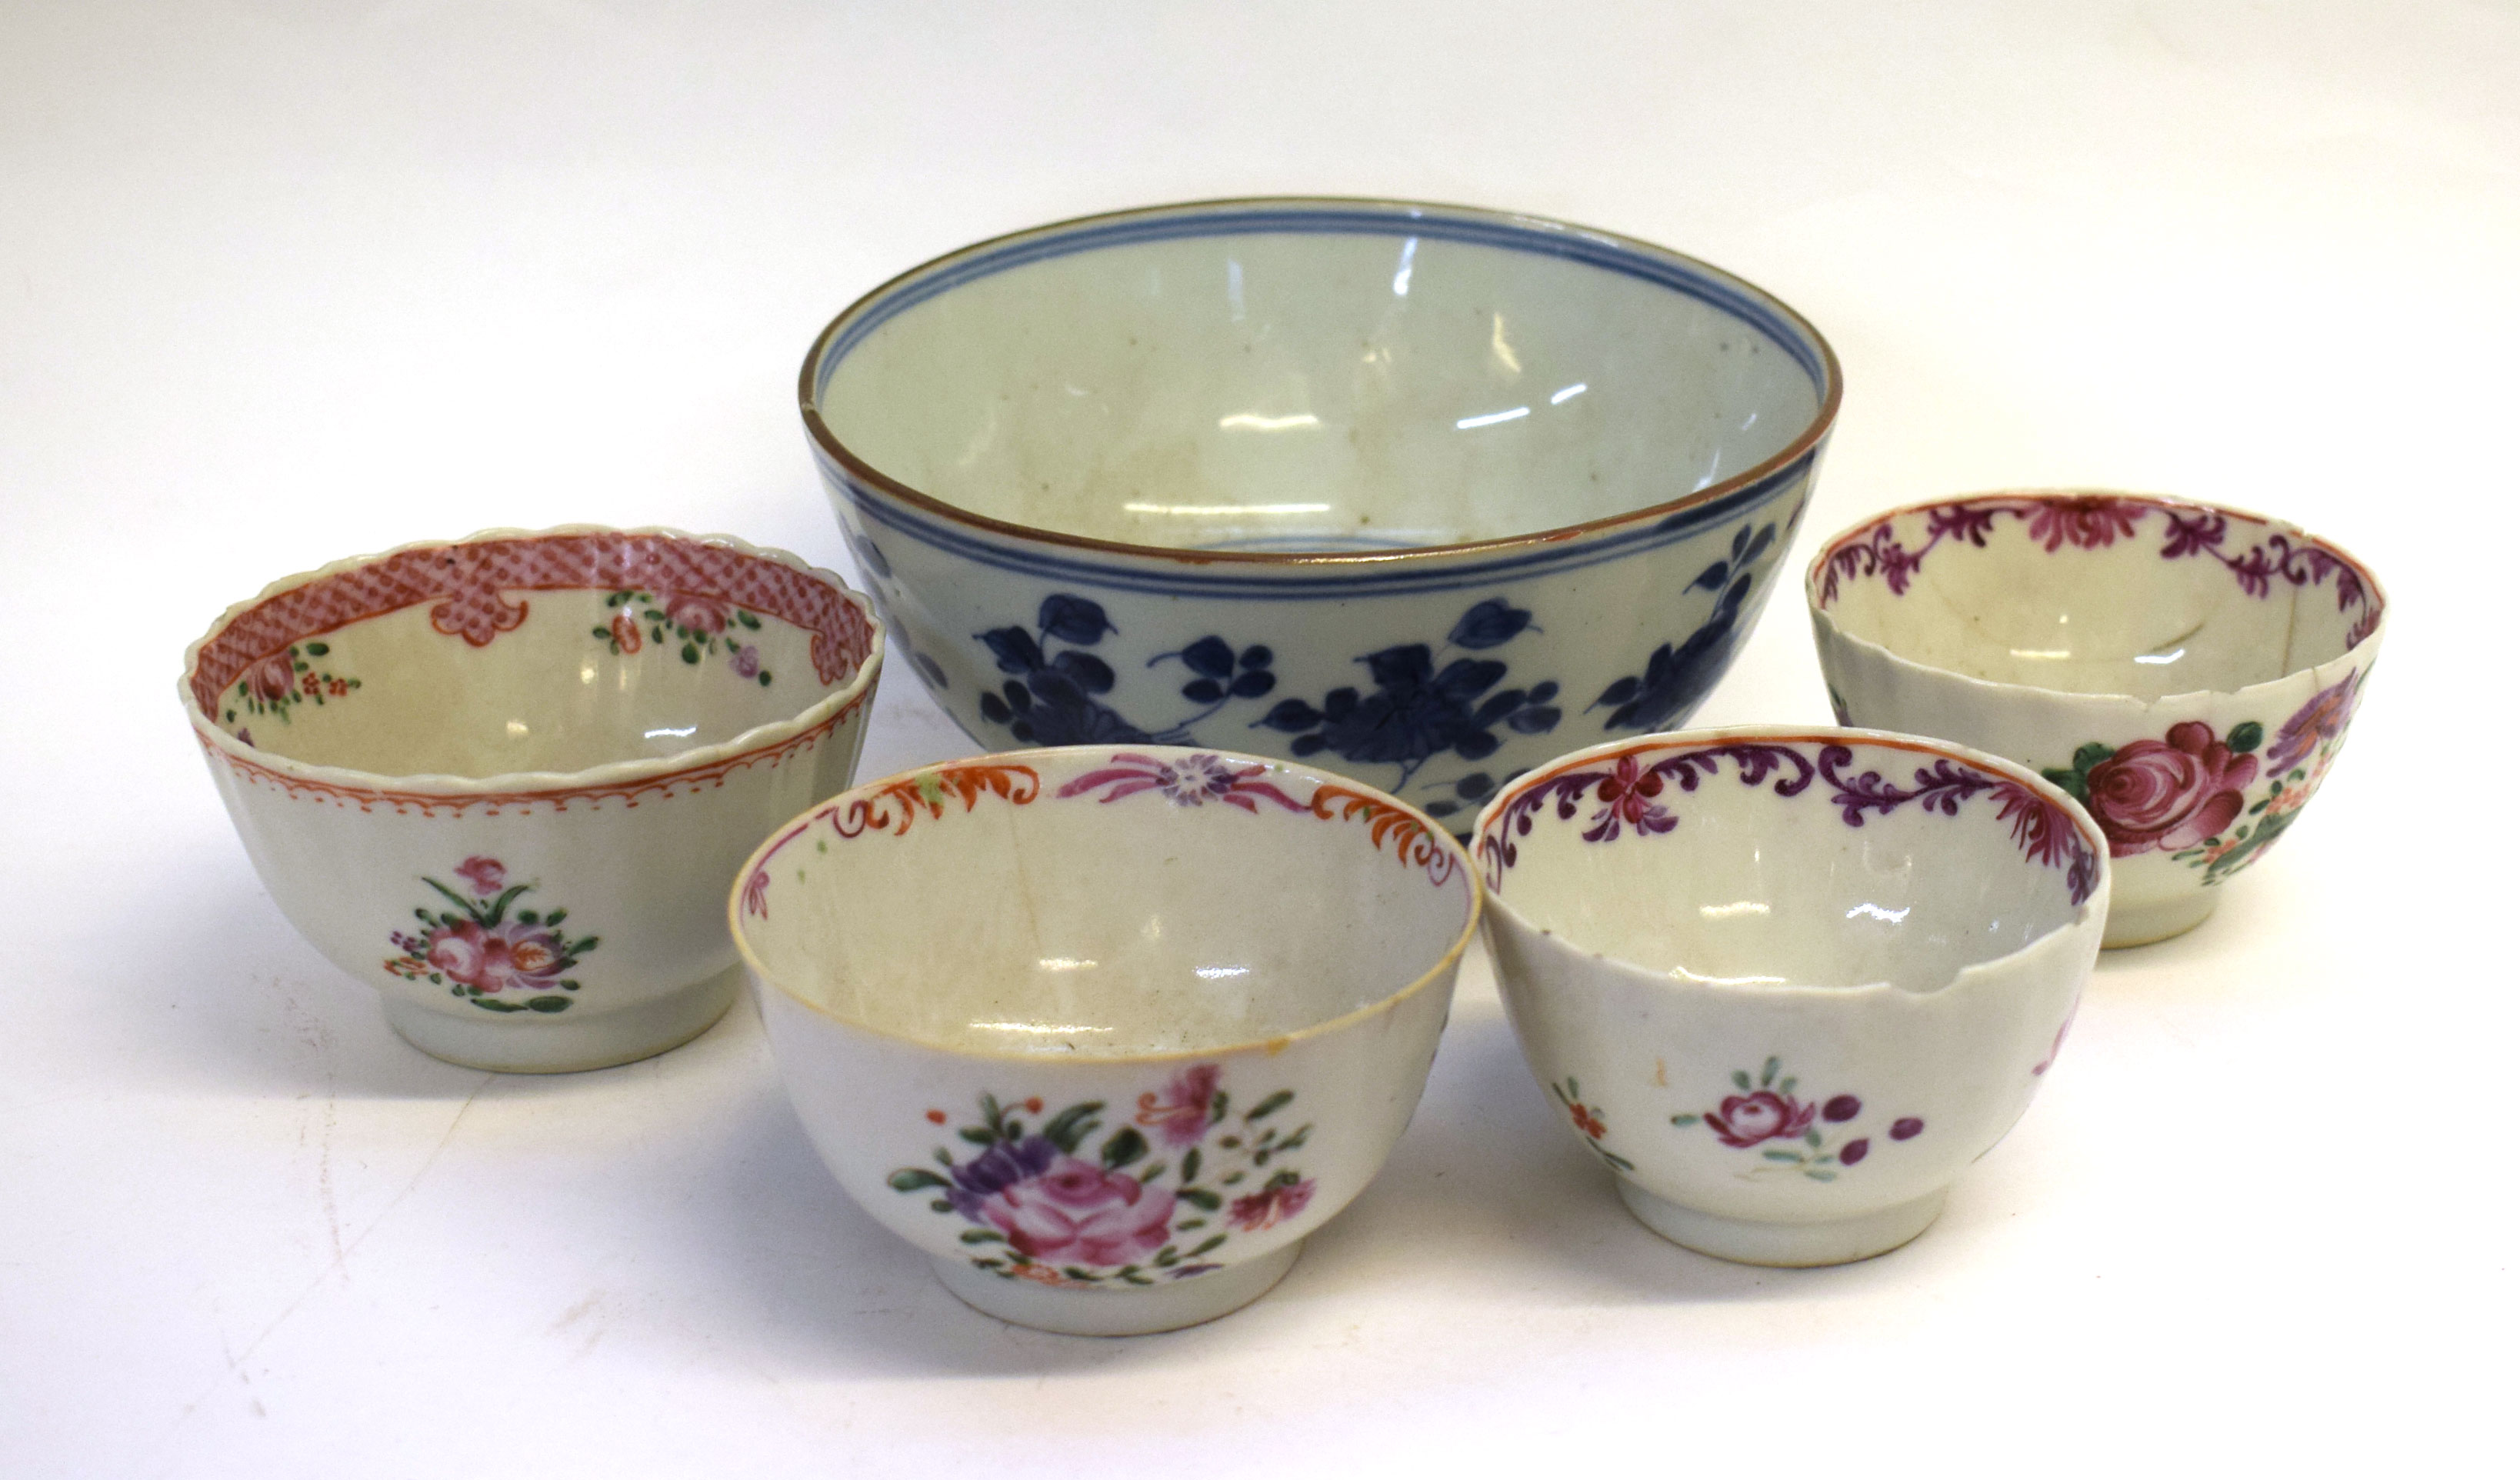 Group of 18th century Chinese porcelain bowls including a blue and white example with Kangxi